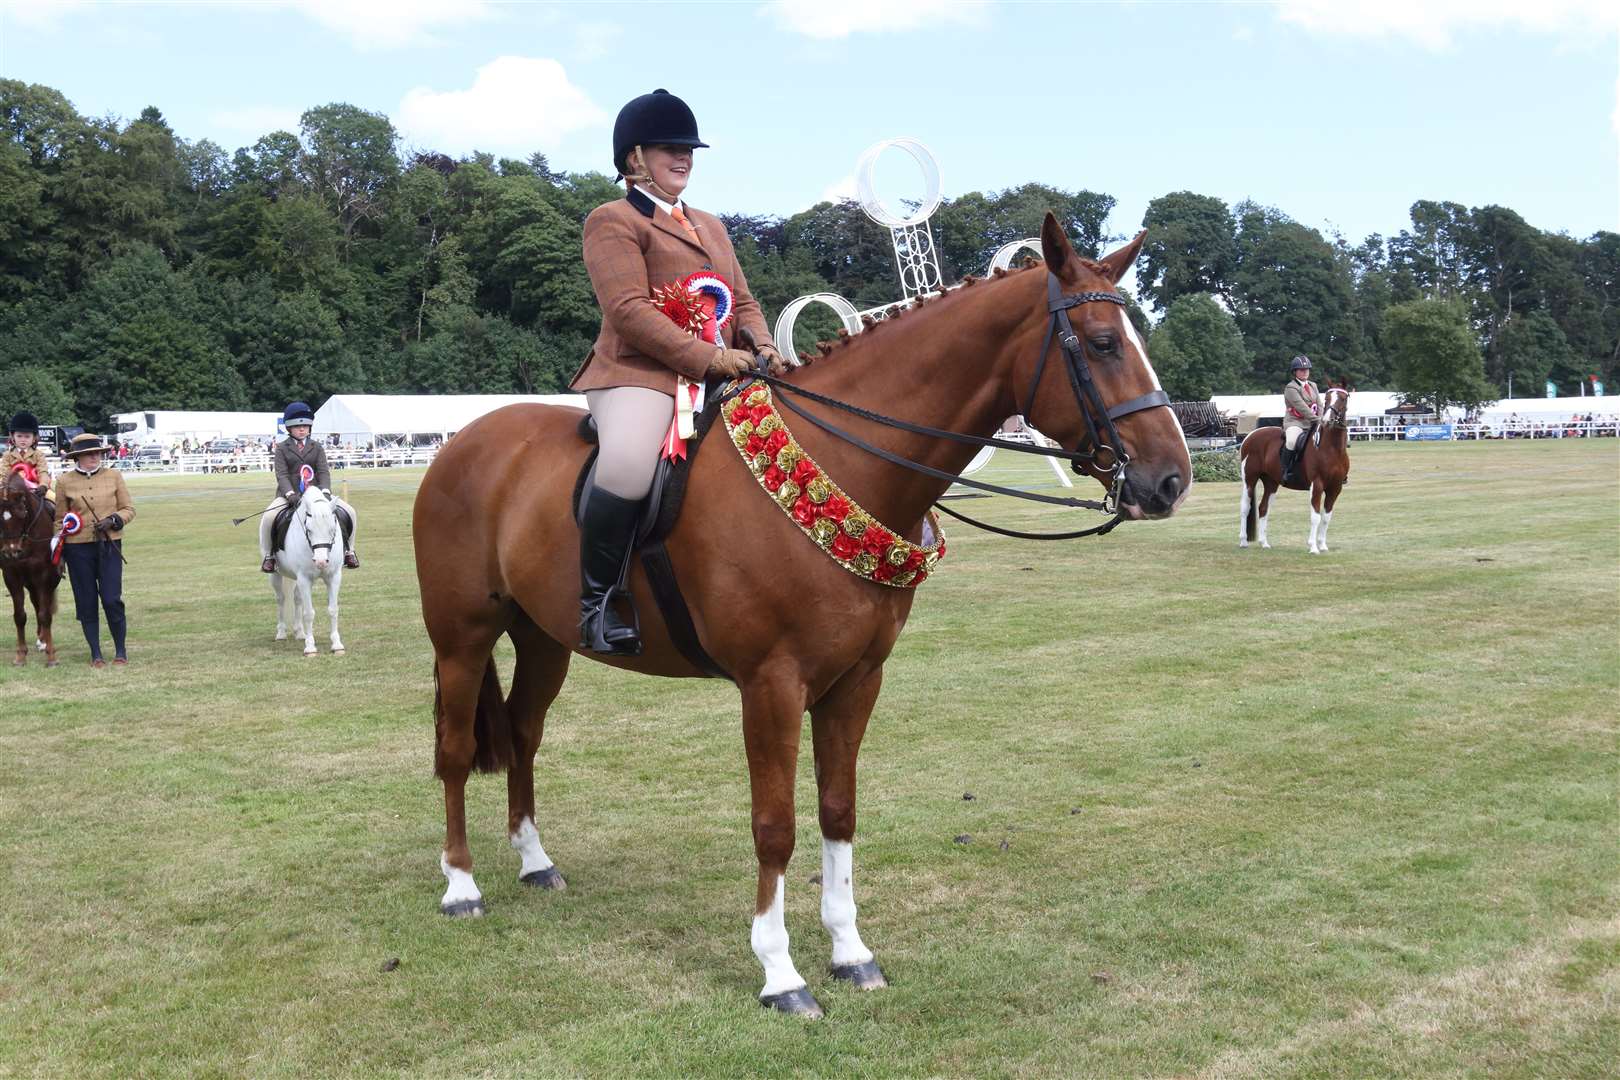 Fiona Menzies from Insch who was on gelding Bowland Winner